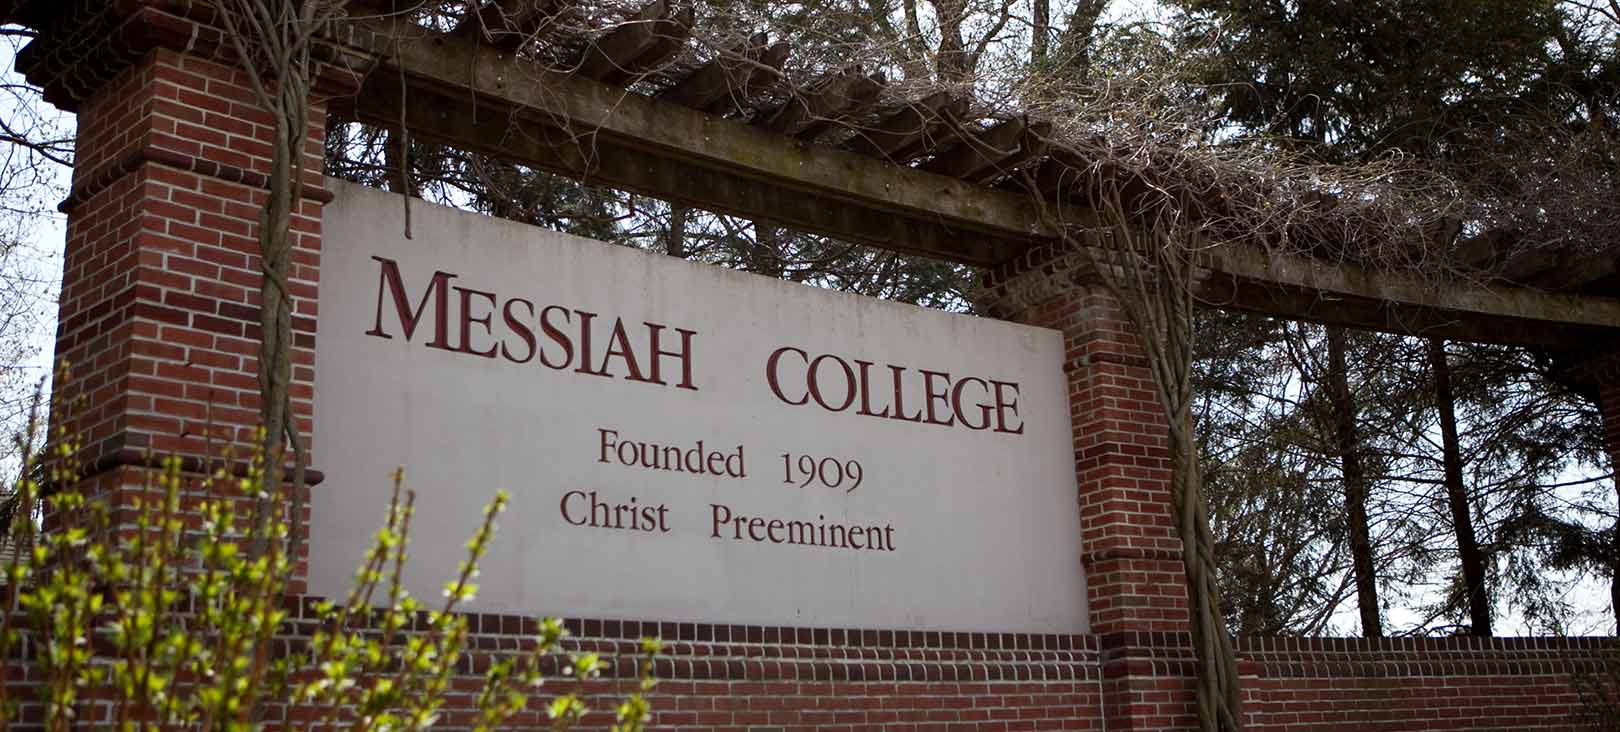 About Messiah College | Messiah, a private Christian College in PA